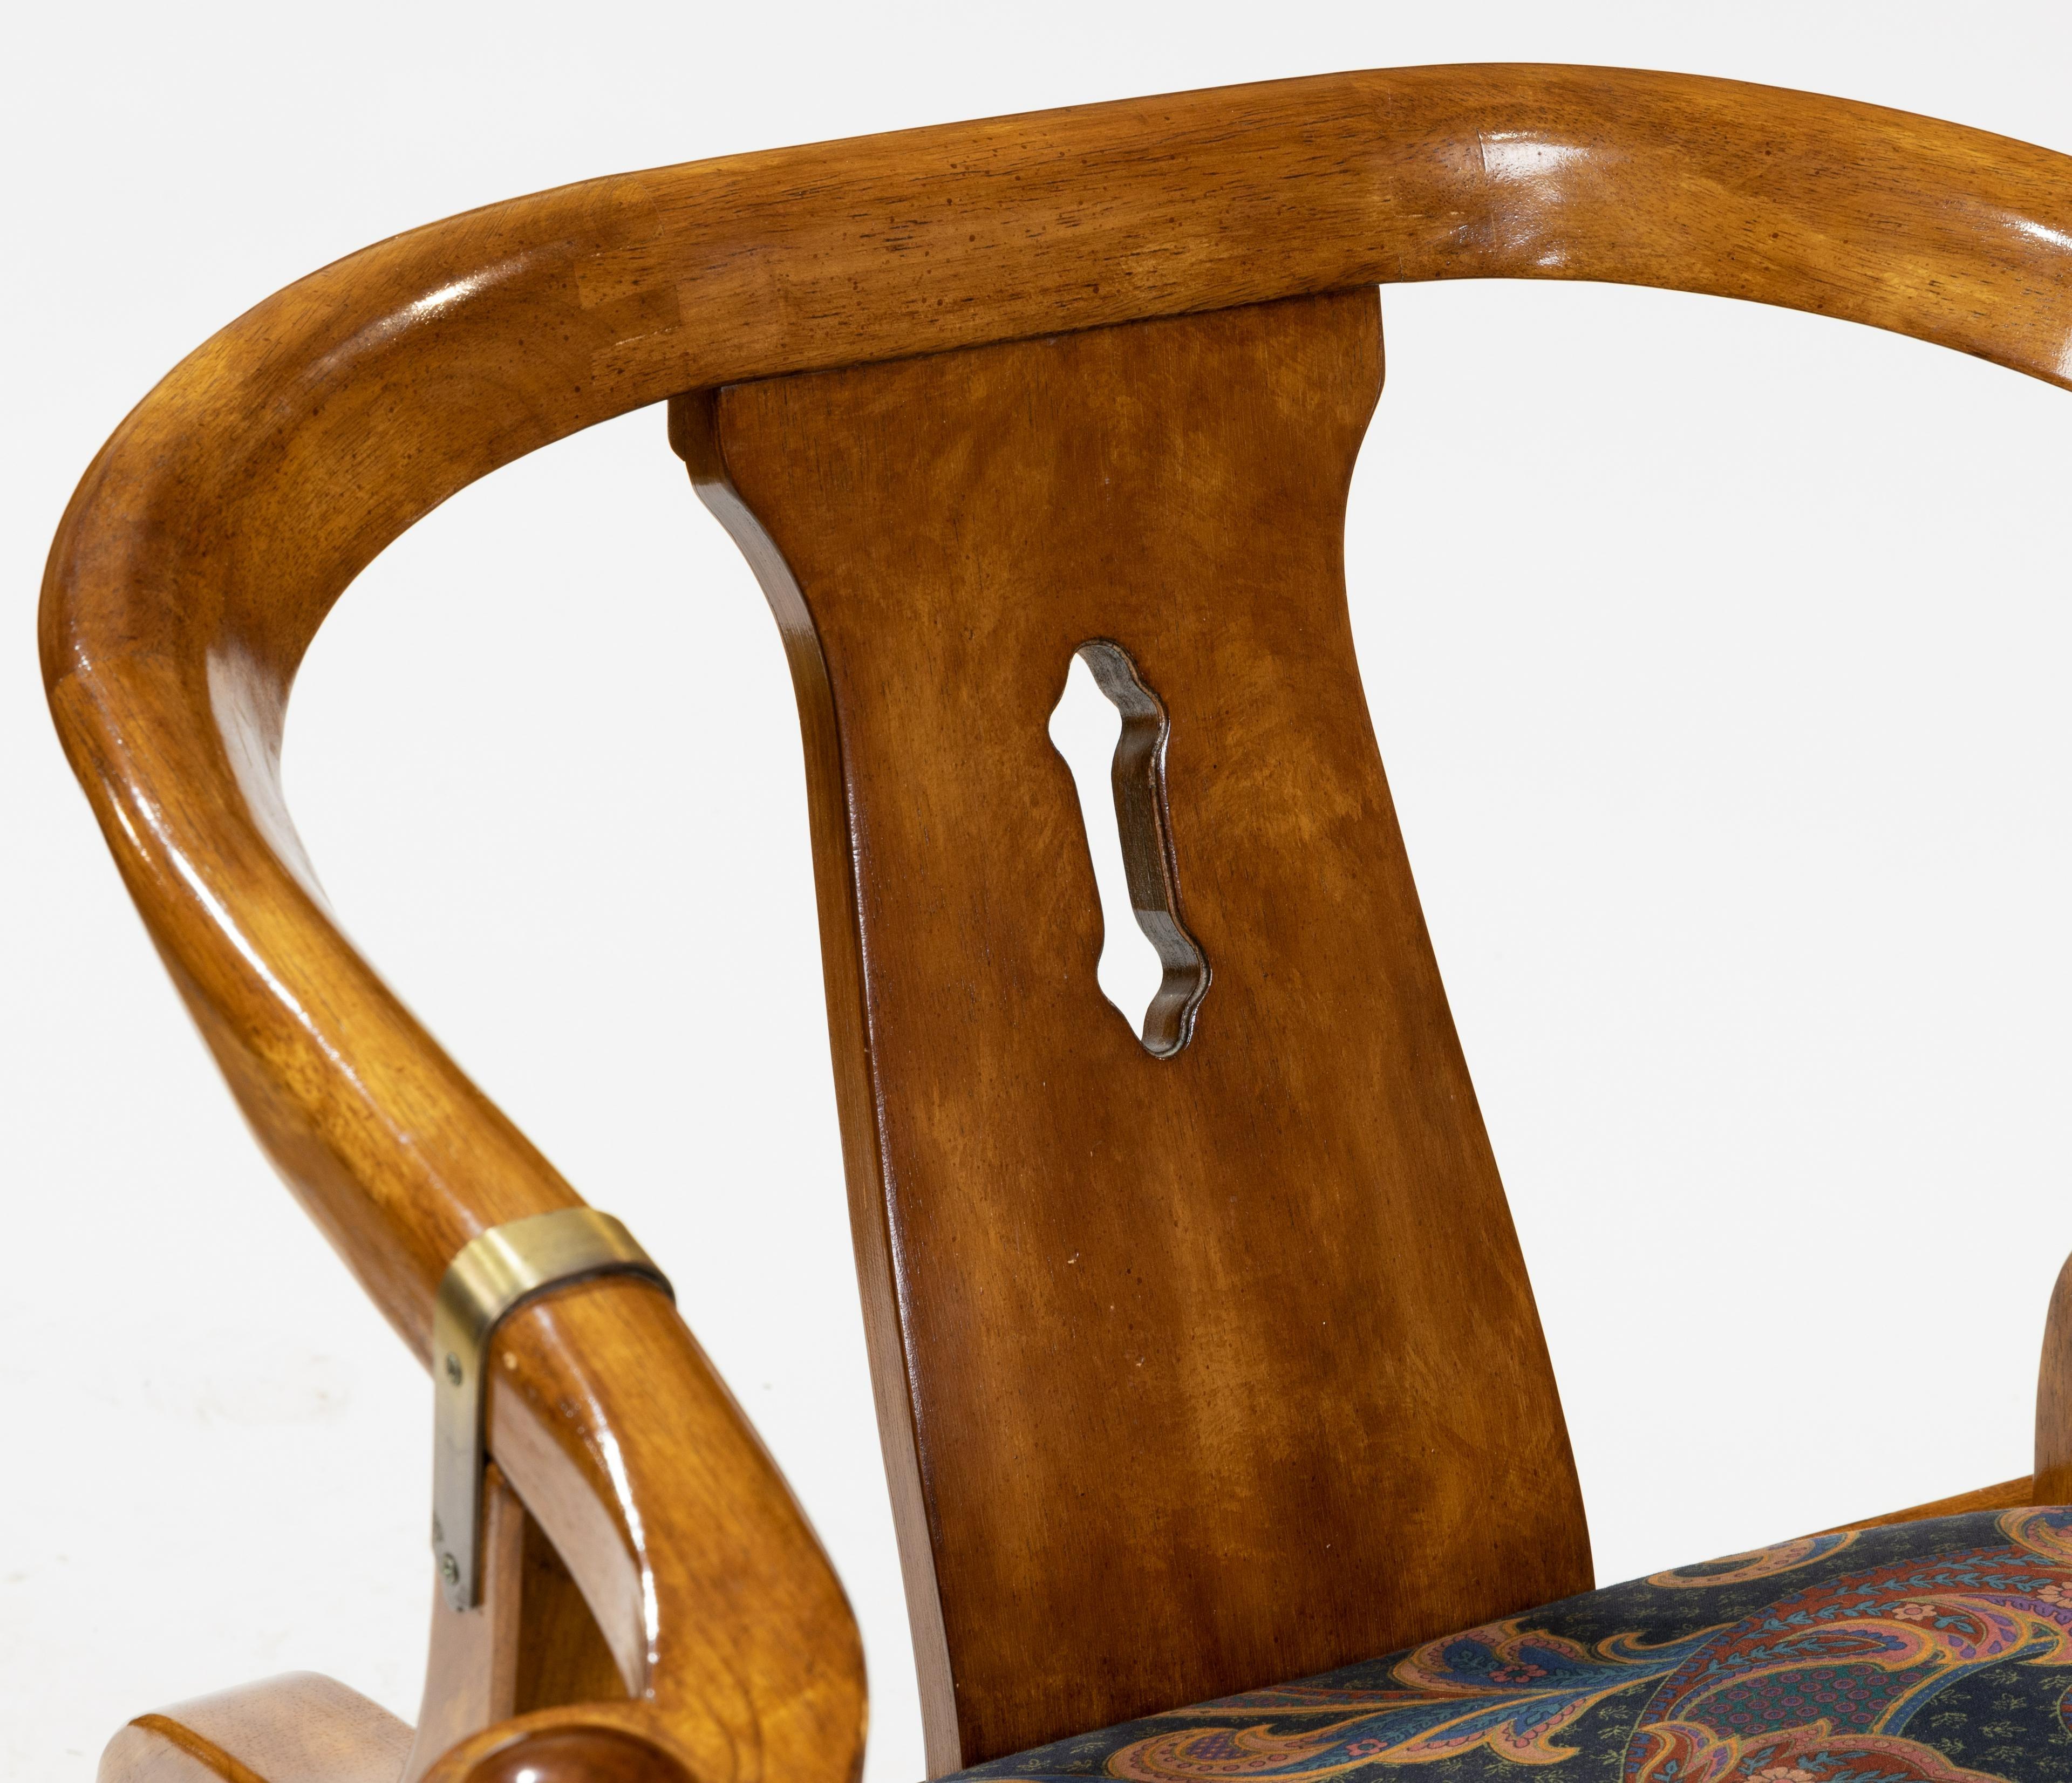 James Mont style horseshoe chair made of wood with brass fittings and upholstered seat.